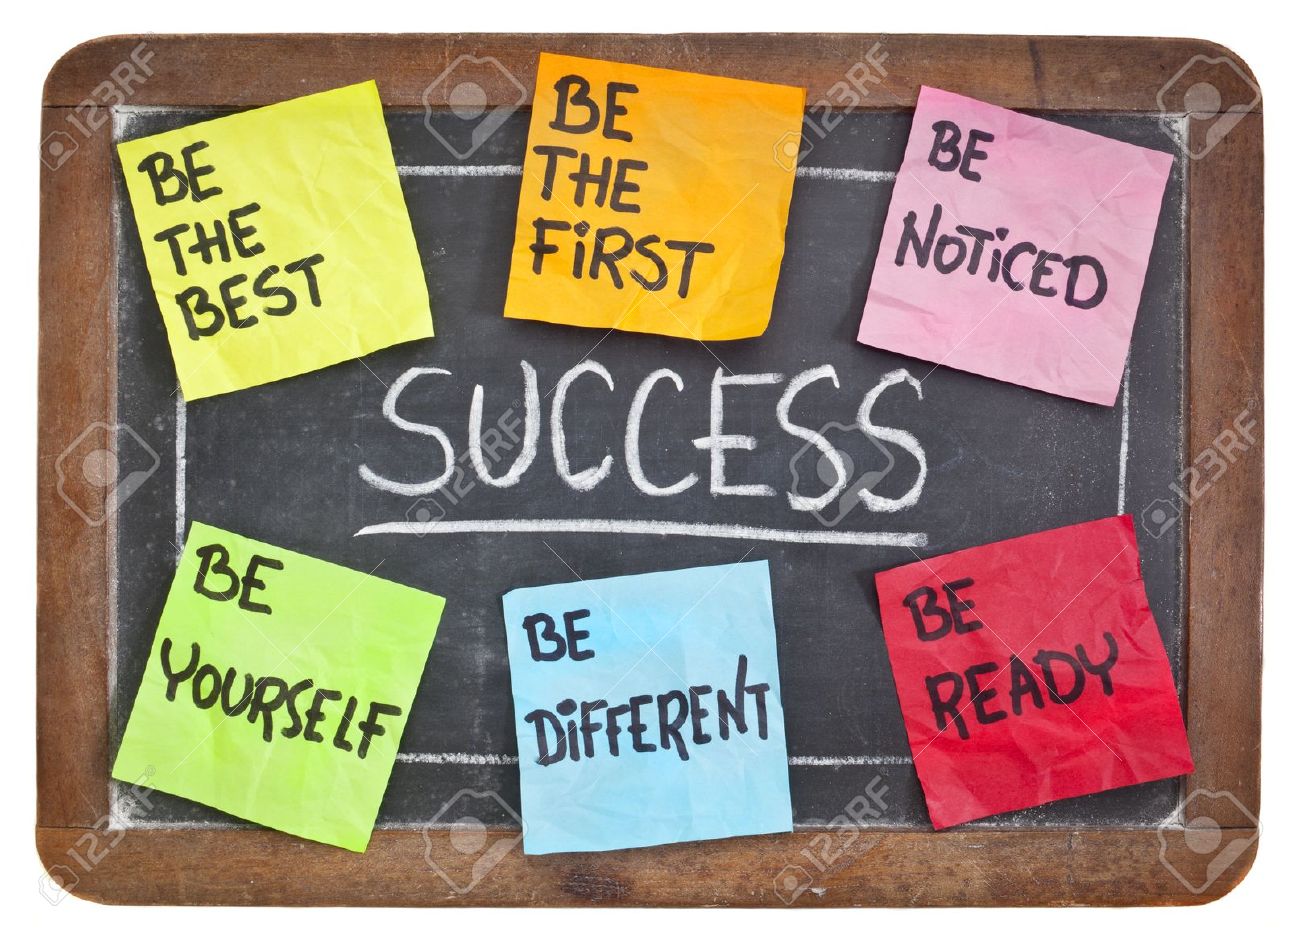 14461873 how to successful concept on a blackboard be the first the best different yourself noticed ready Stock Photo